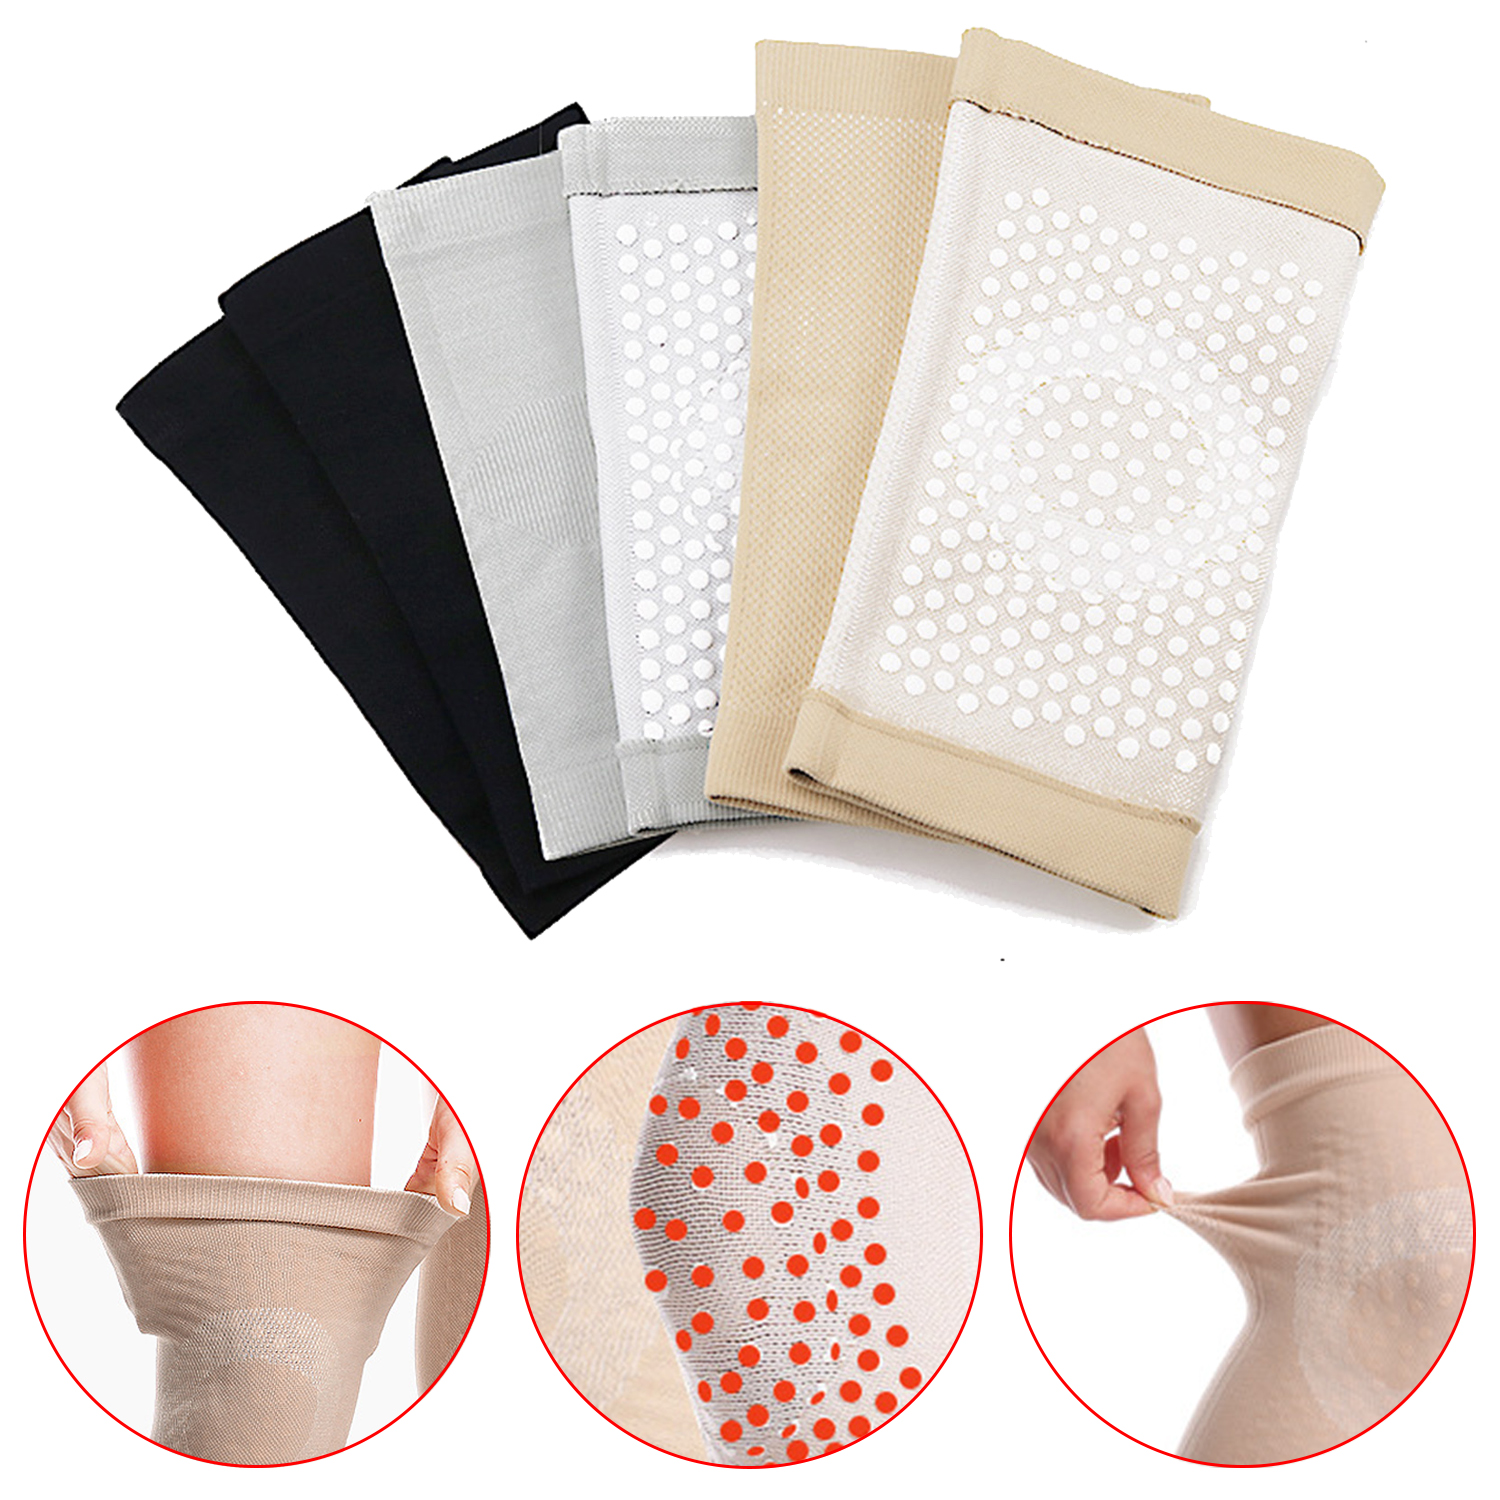 Knee Pads Men And Women Old Men And Old Women Cold Leg Joints Cold-proof Light Breathable Heat-gathering Knee Pads Warm Knee Pads